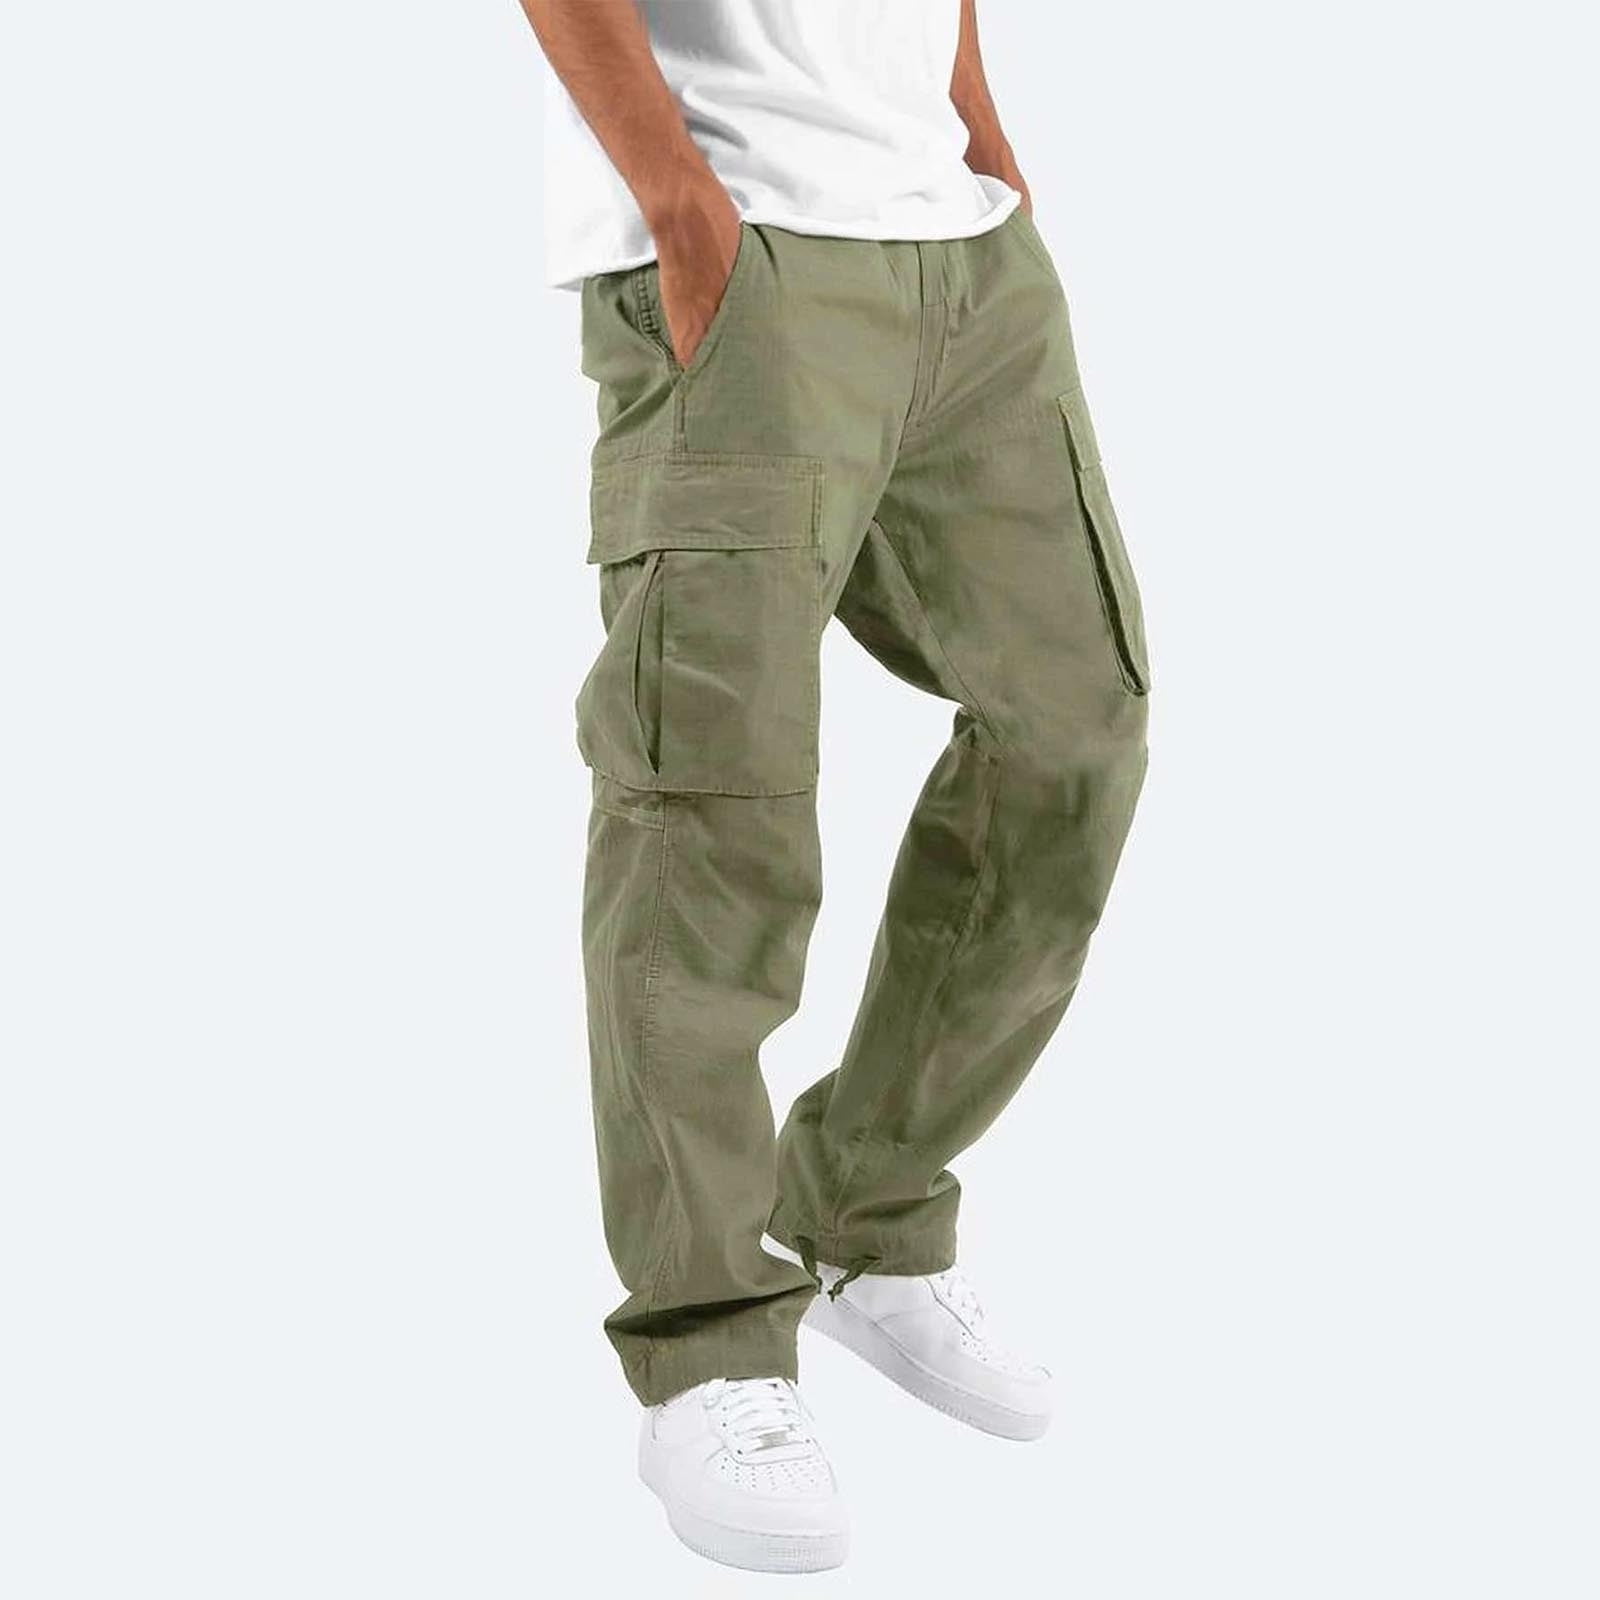 Daily Wear Cargo Pant, Men's Slim Fit Black Cargo Trouser, Black Color Cargo,  Relaxed Fit Cargo,